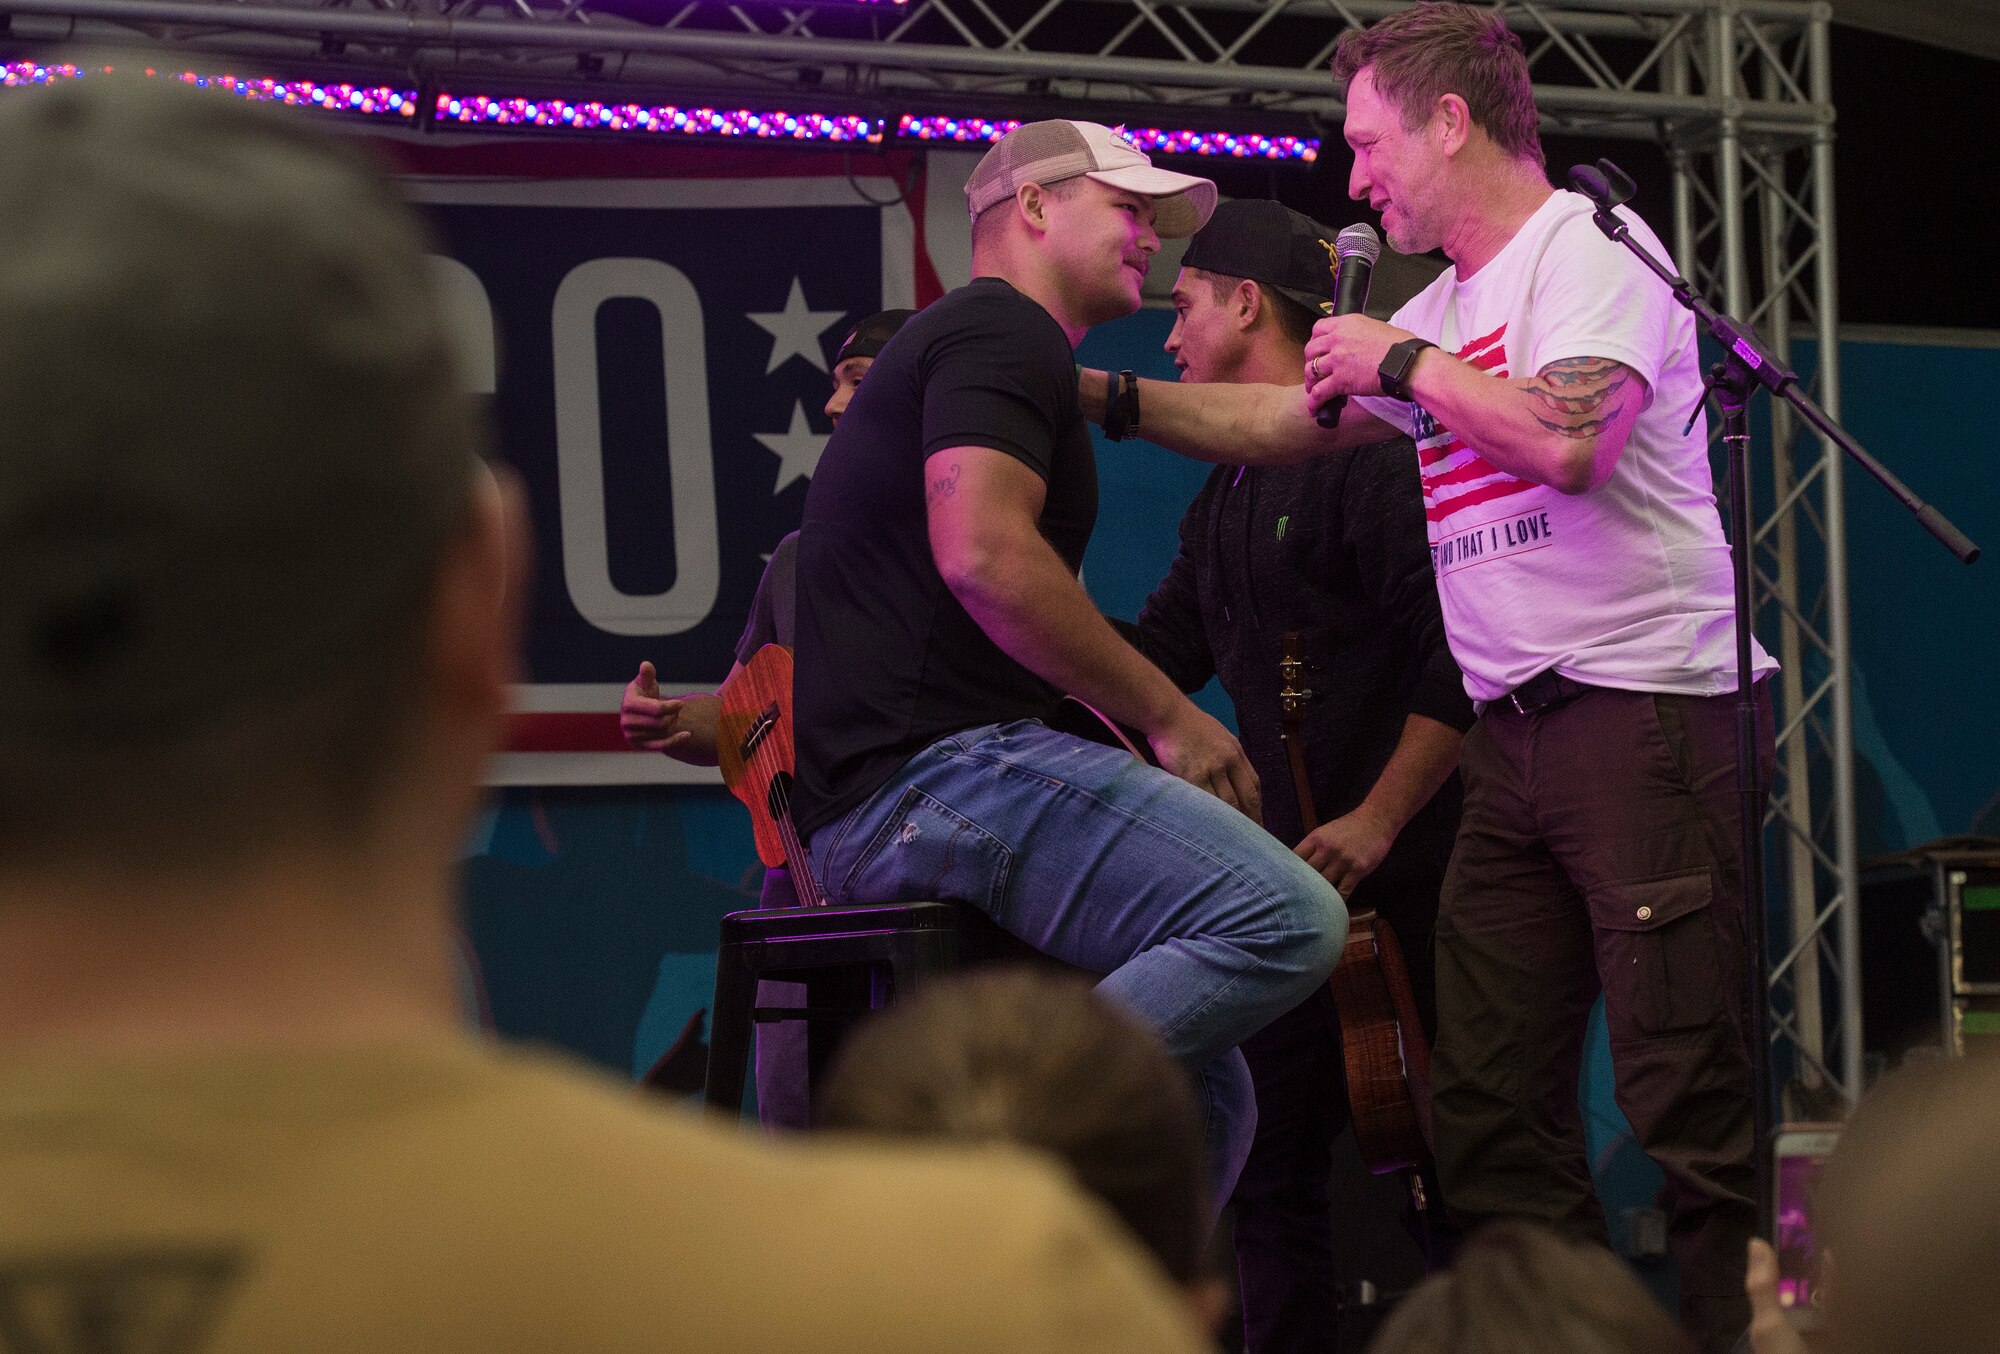 Craig Morgan, right, country music singer and songwriter, thanks a service member for performing a song with him during the United Service Organizations (USO) tour April 1, 2019, at Al Udeid Air Base, Qatar. U.S. Air Force Gen. Paul Selva, Vice Chairman of the Joint Chiefs of Staff, hosted the tour alongside celebrities and performers including Robert Irvine, Craig Morgan, and professional athletes.